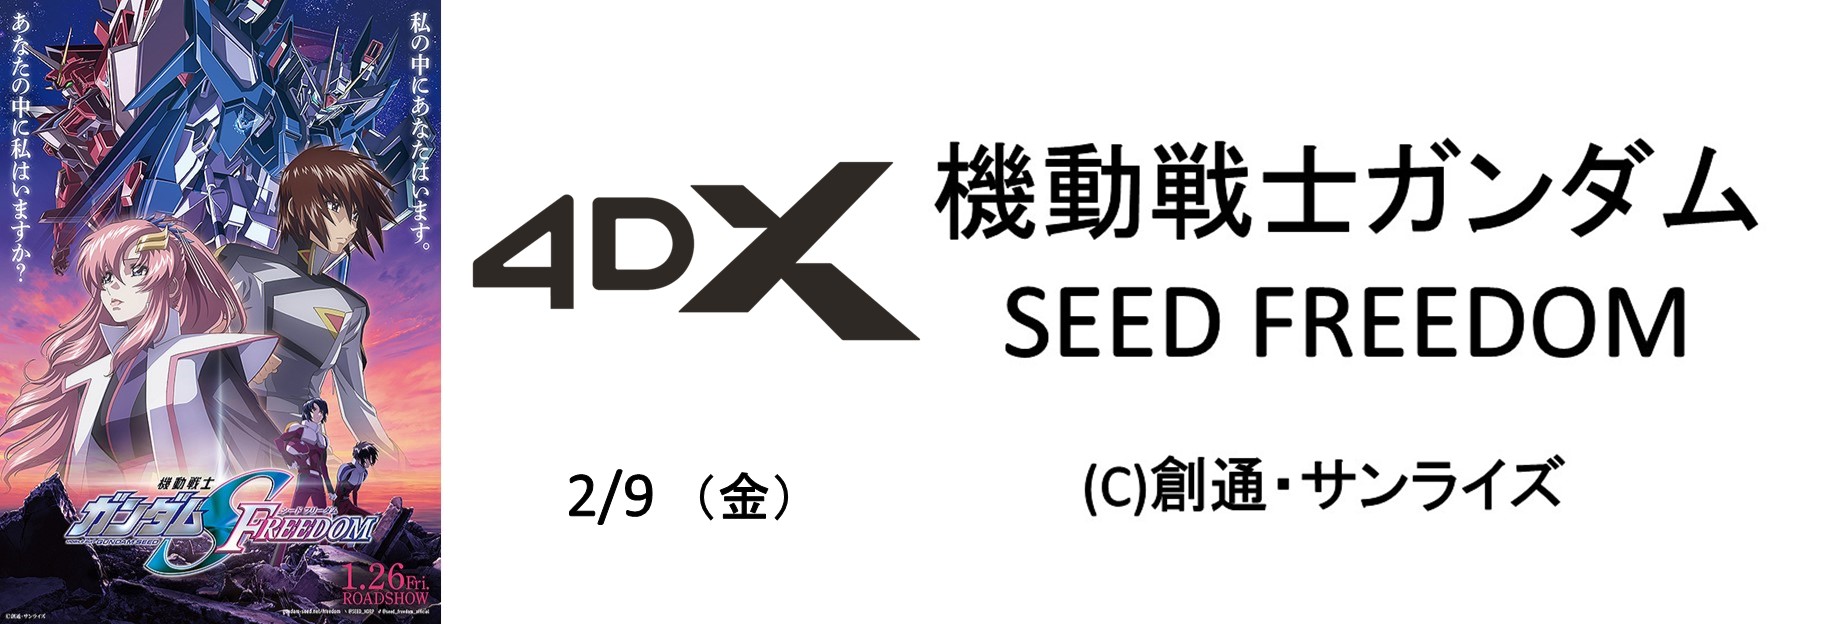 SEED-FREEDOM　4DX